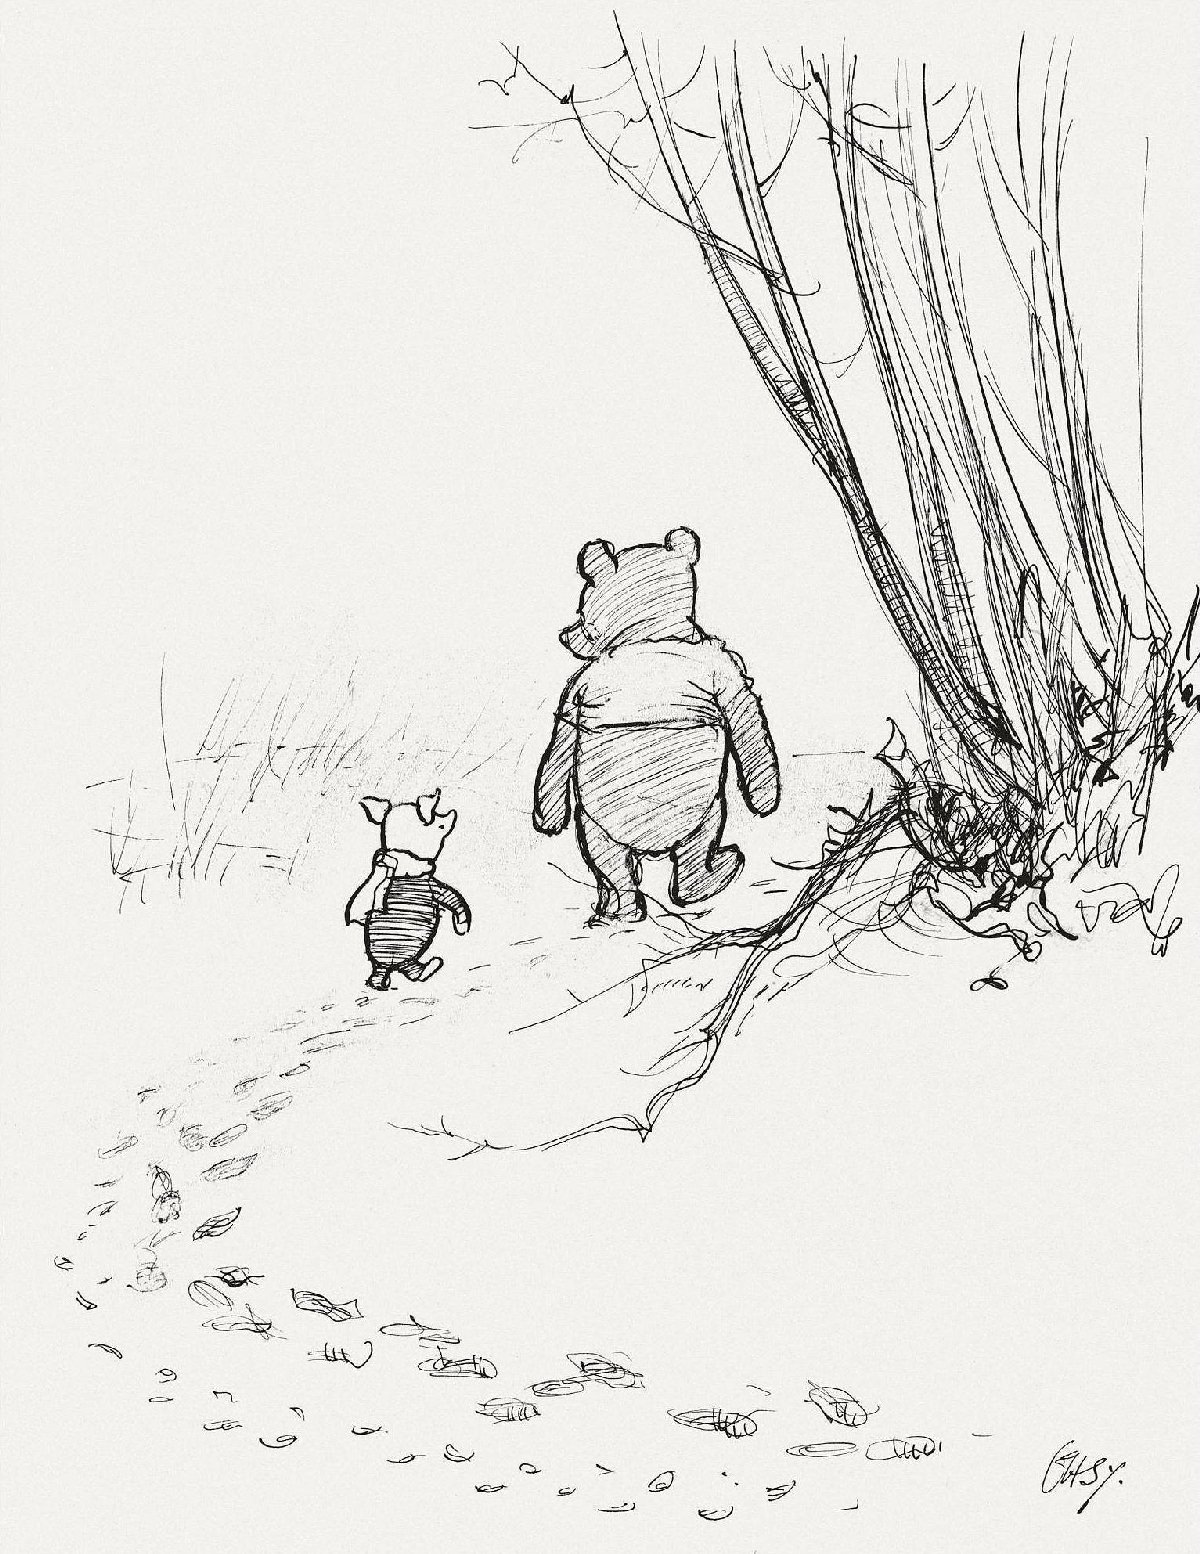 With these few words he went on tracking, and Piglet,after watching him for a minute or two, ran after him